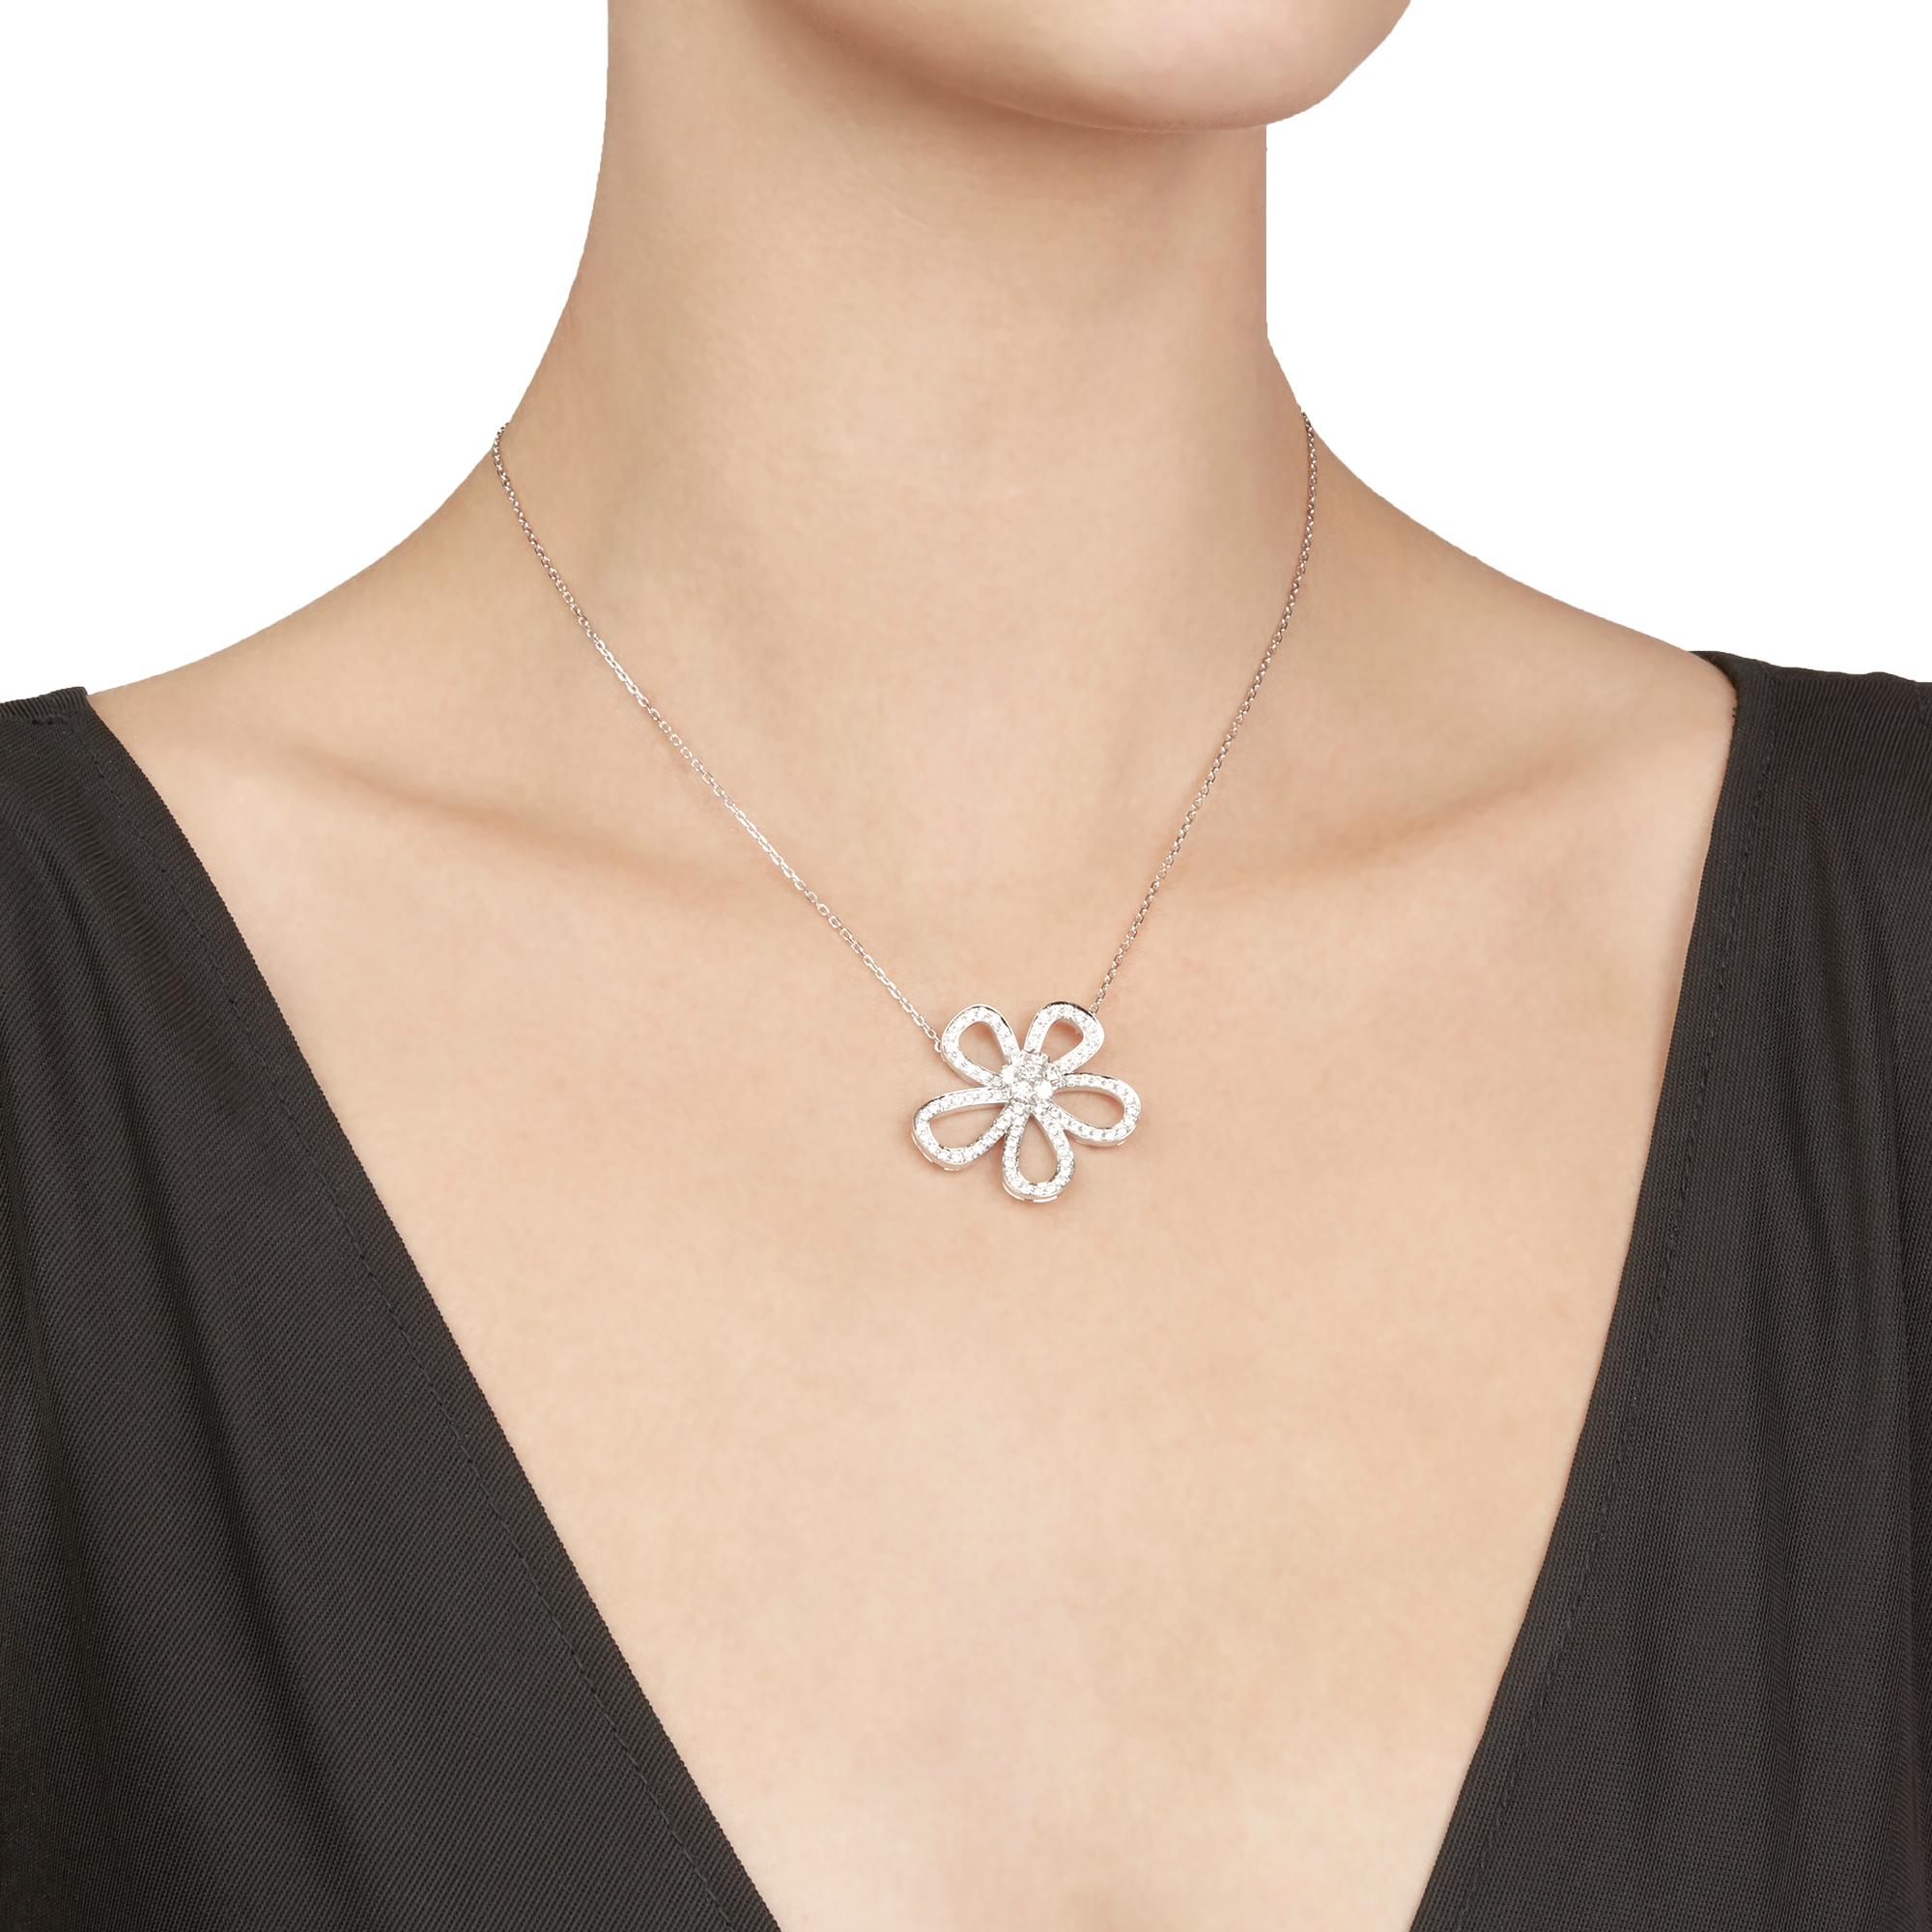 This Necklace by Van Cleef & Arpels is from their Flowerlace collection and features 78 round brilliant cut Diamonds of 2.37ct total colour E-F, clarity VVS, made in 18k White Gold. The Necklace has a secure lobster clasp. Complete with Van Cleef &